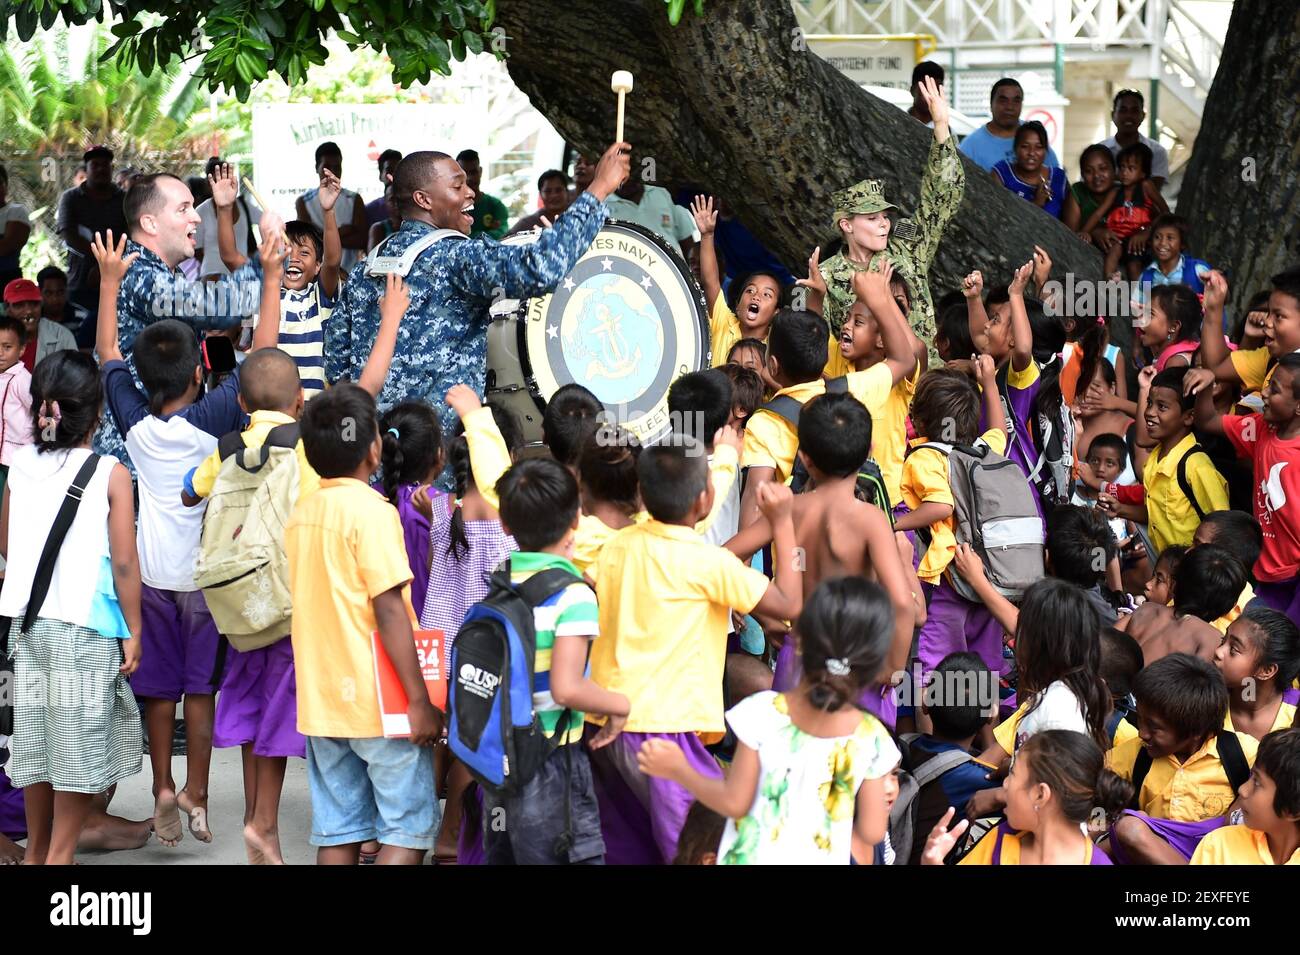 TARAWA, Kiribati (June 4, 2015) Members of the U.S. Pacific Fleet Band entertain a group of kids at a concert in Bairiki Square during a Pacific Partnership 2015 visit to the Independent Republic of Kiribati. Now in its 10th iteration, Pacific Partnership is the largest annual multilateral humanitarian assistance and disaster relief preparedness mission conducted in the Indo-Asia-Pacific Region. (Photo by Chief Mass Communication Specialist Jonathan R. Kulp/U.S. Navy) 150604-N-HY254-192 *** Please Use Credit from Credit Field *** Stock Photo